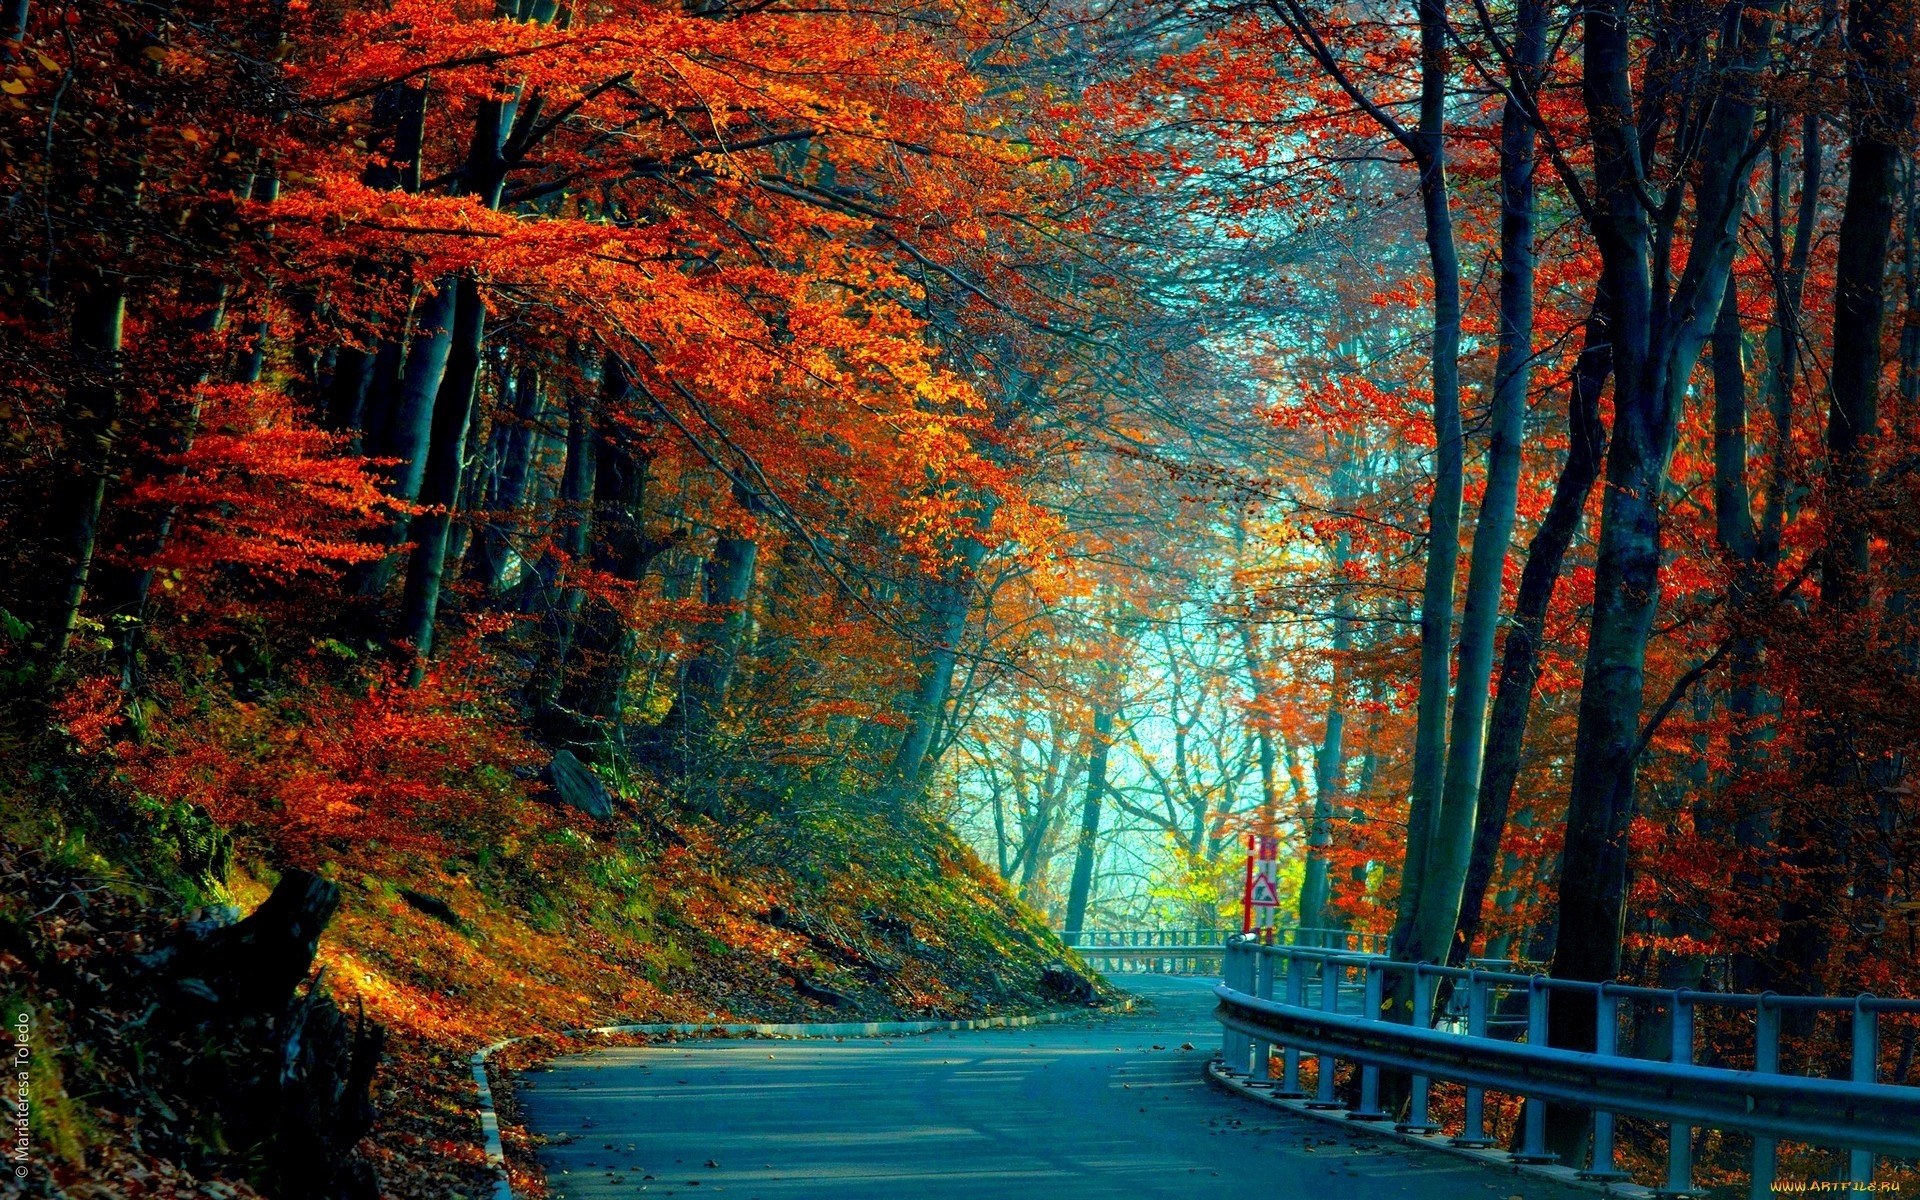 General 1920x1200 fall road trees red leaves watermarked asphalt landscape nature fallen leaves